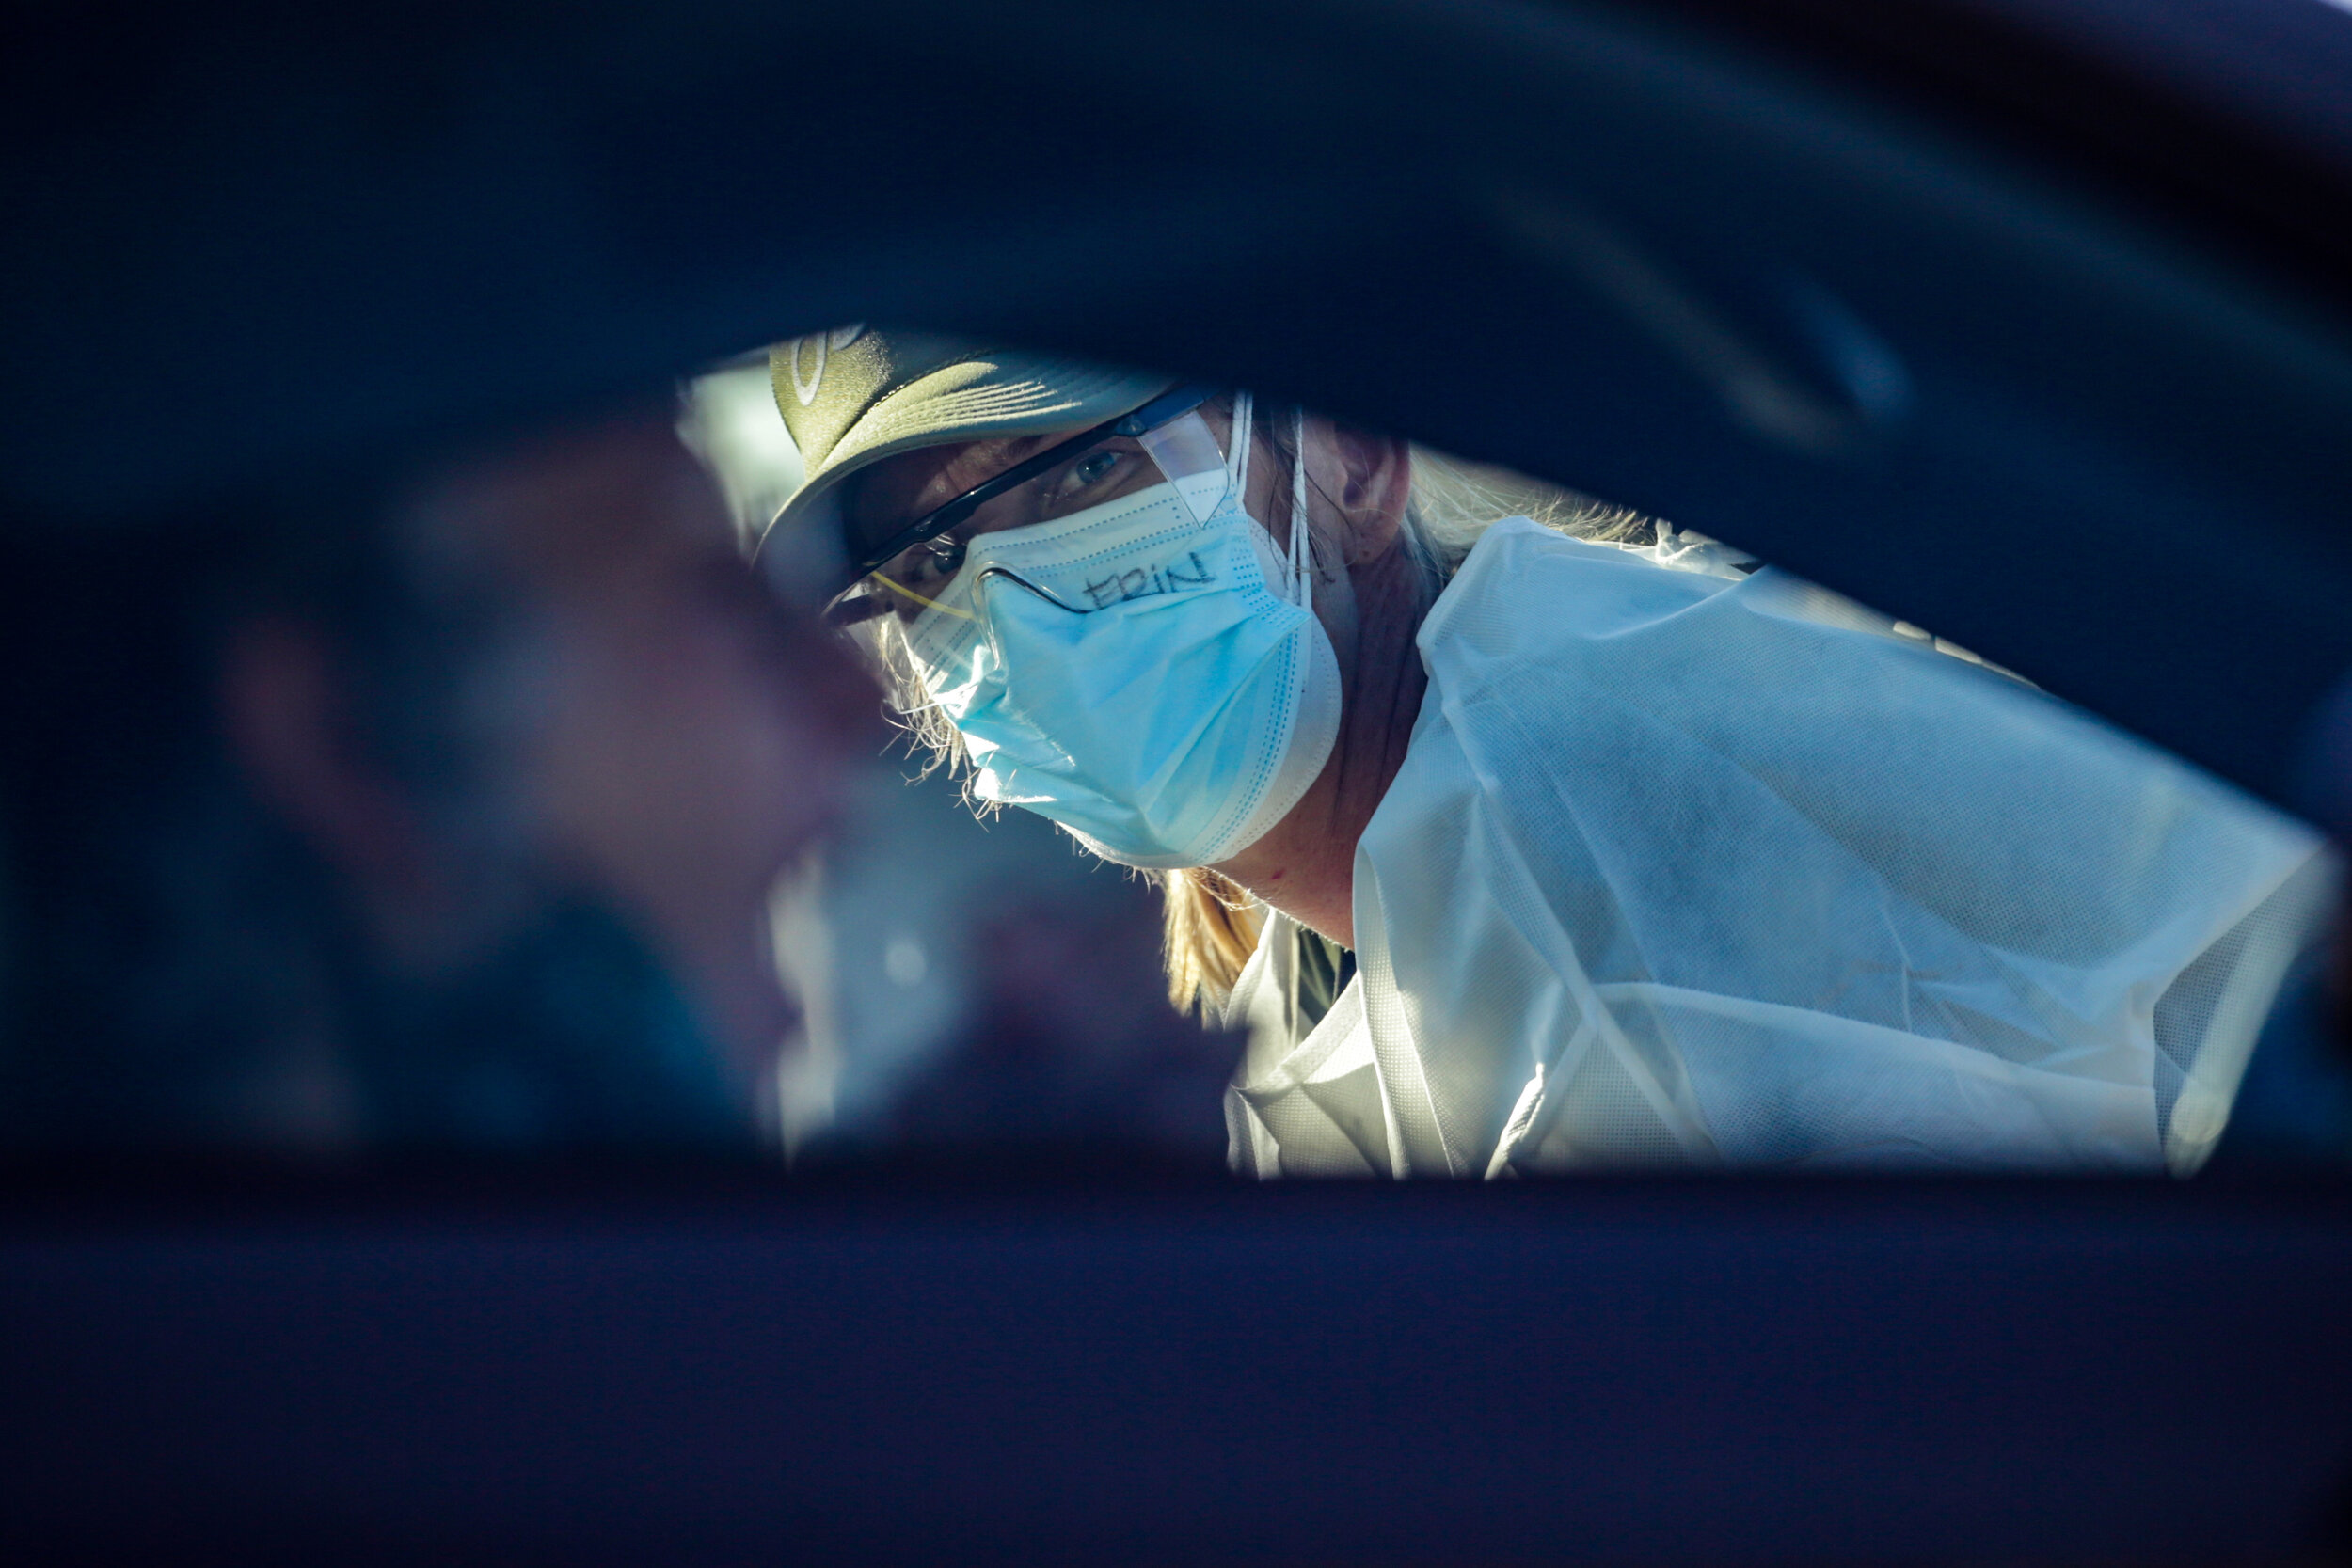  Los Angeles, CA, Wednesday, November 11, 2020 - A volunteer looks on as a man swabs his mouth at a drive by Covid-19 testing site.  According to the Atlantic, Covid Tracking Project, nearly 2 million Americans are tested daily.  